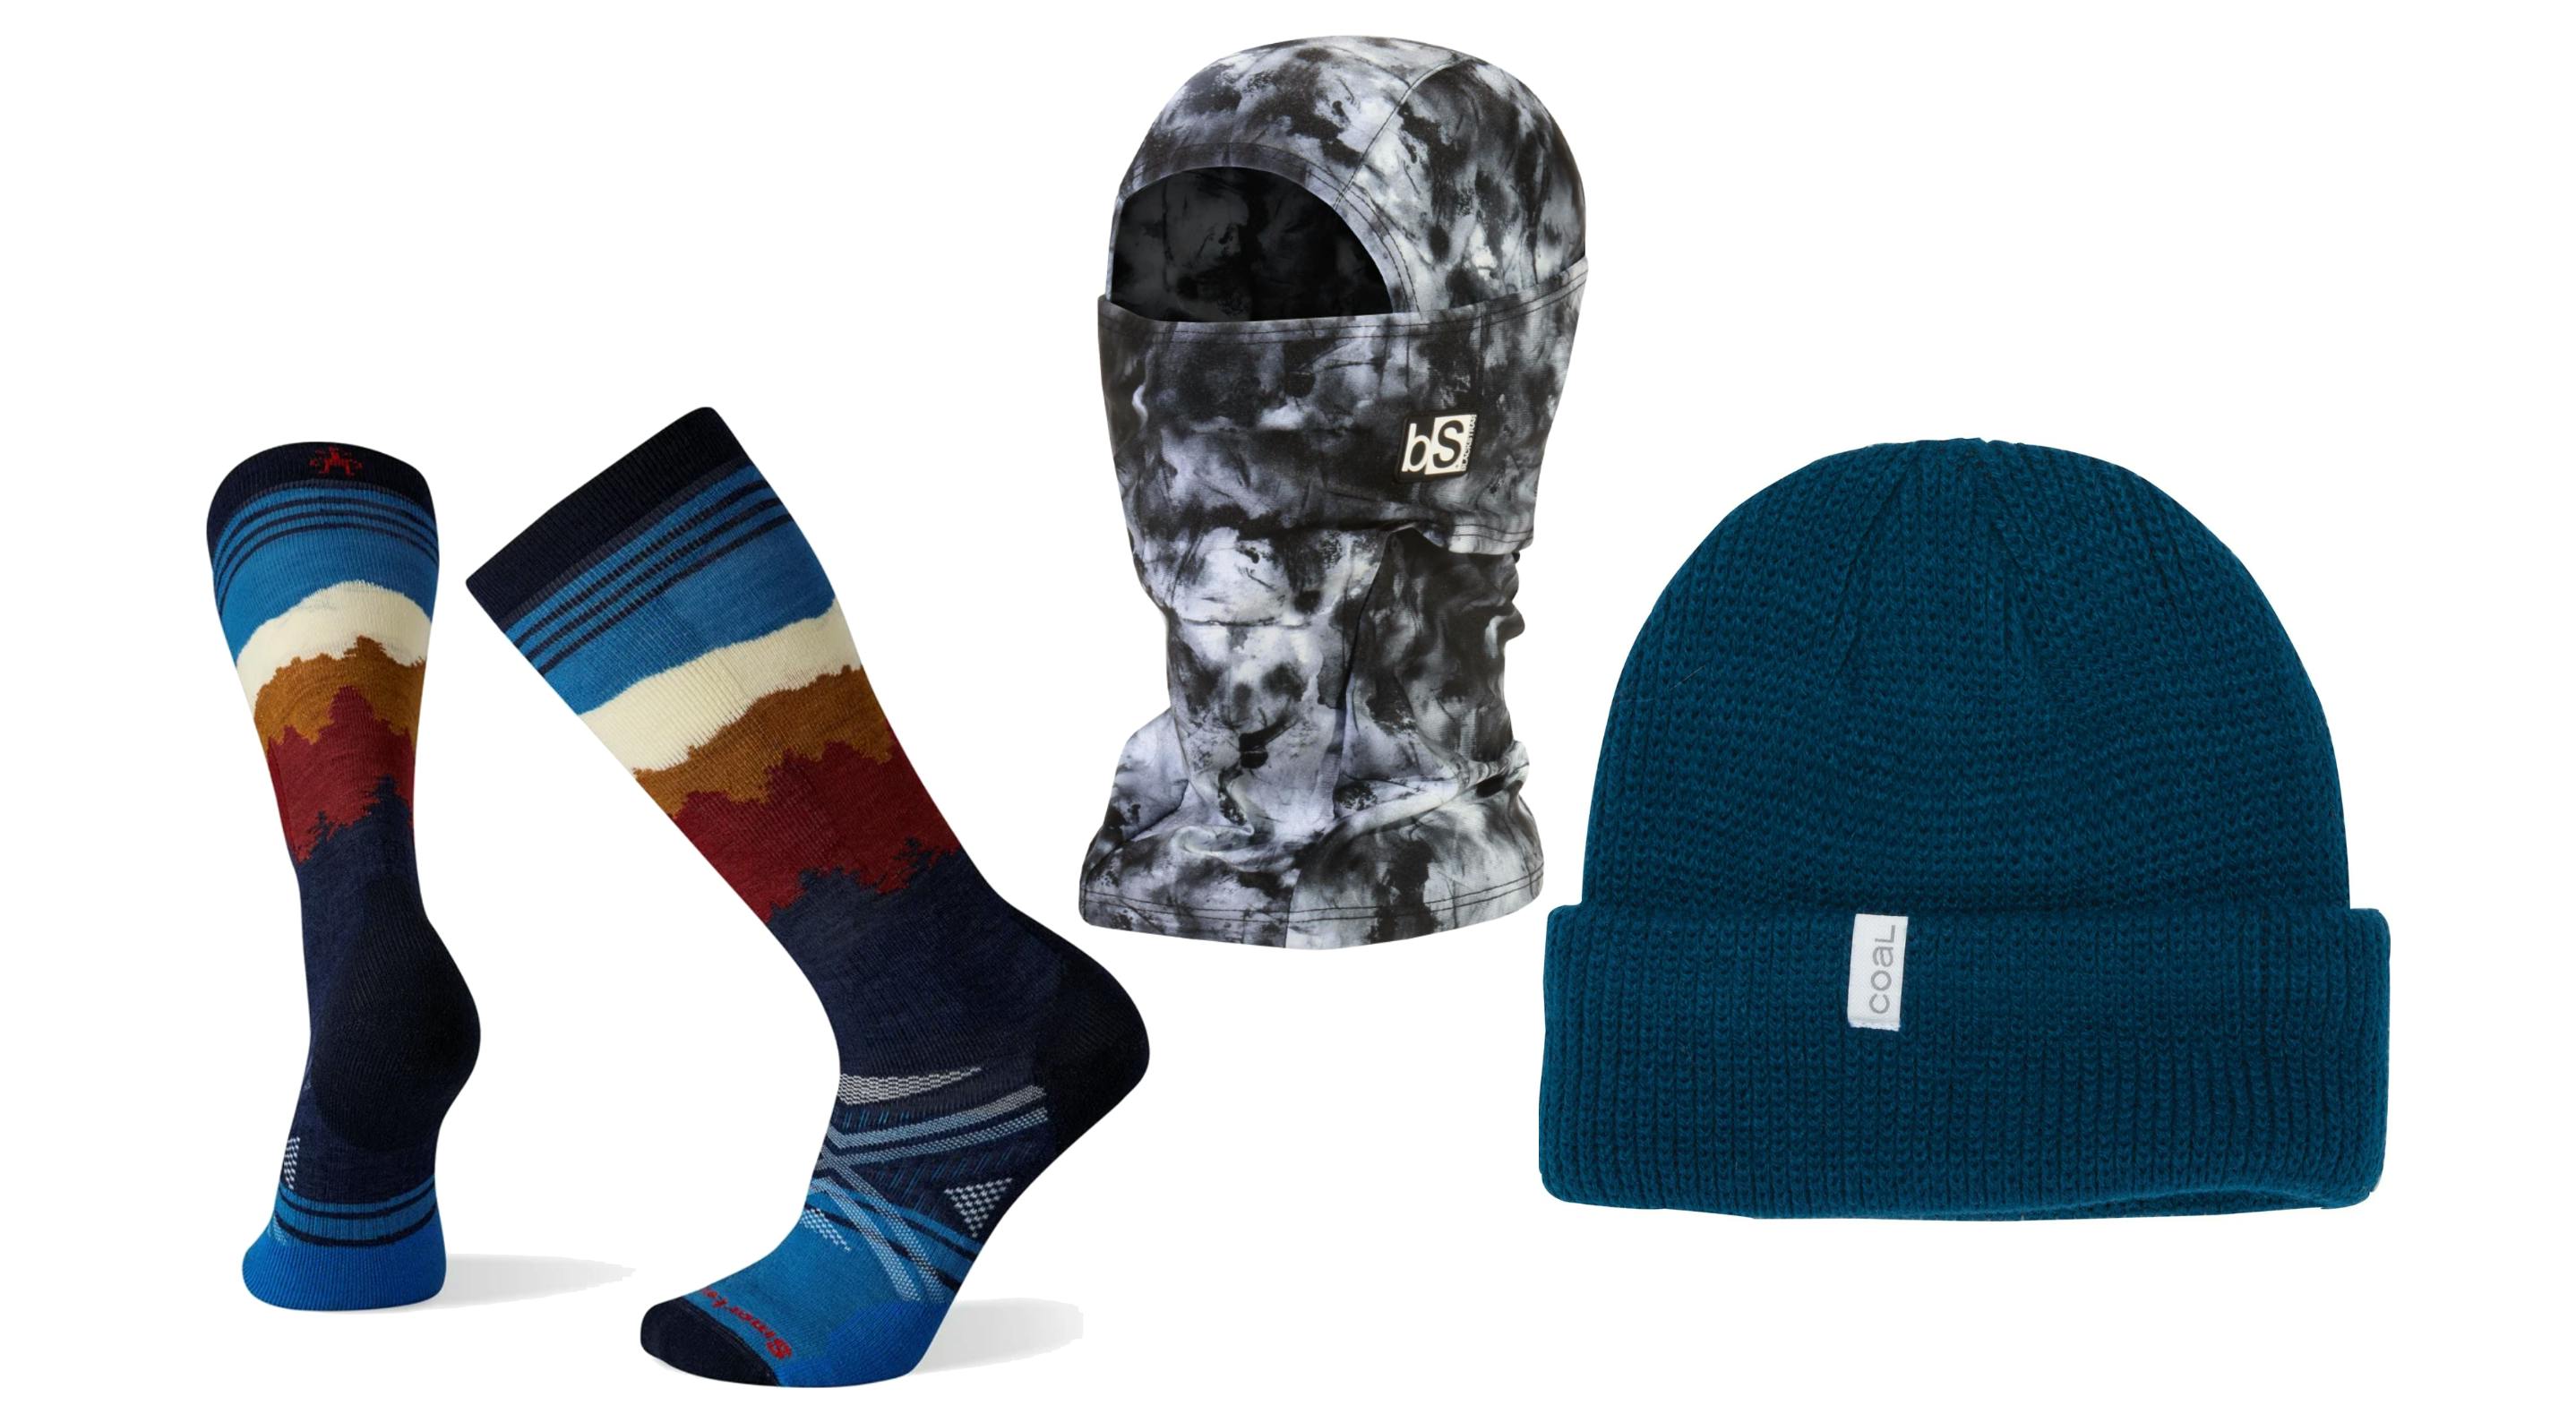 Fishing Hunting Gifts for Men, Funny Beanie Hat and Socks for Him